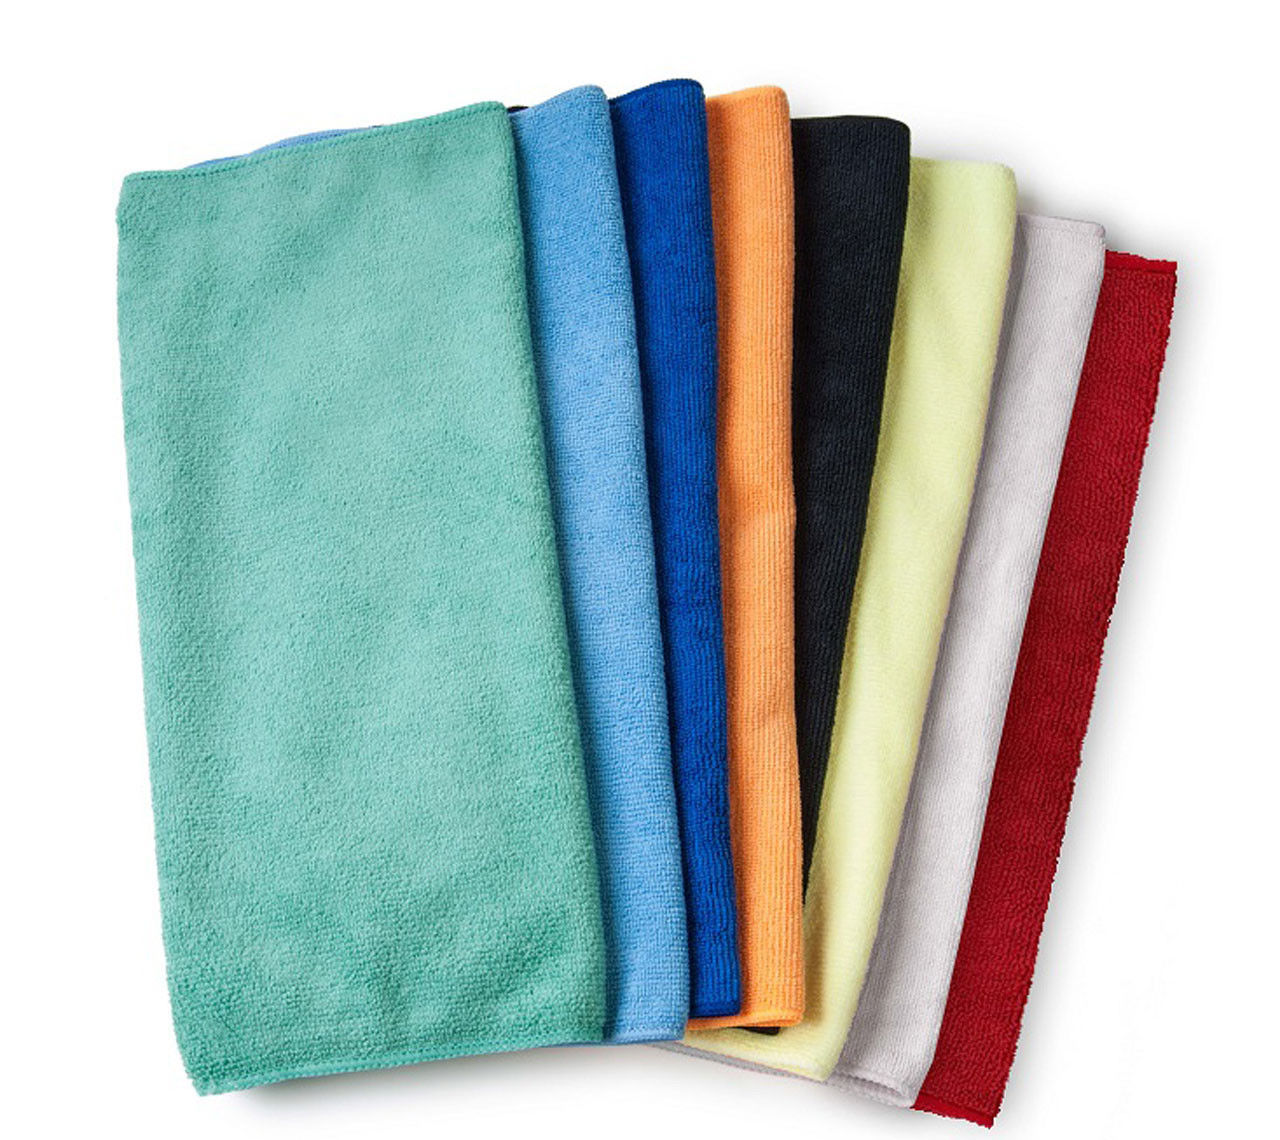 What materials are the golf towels in bulk made from?